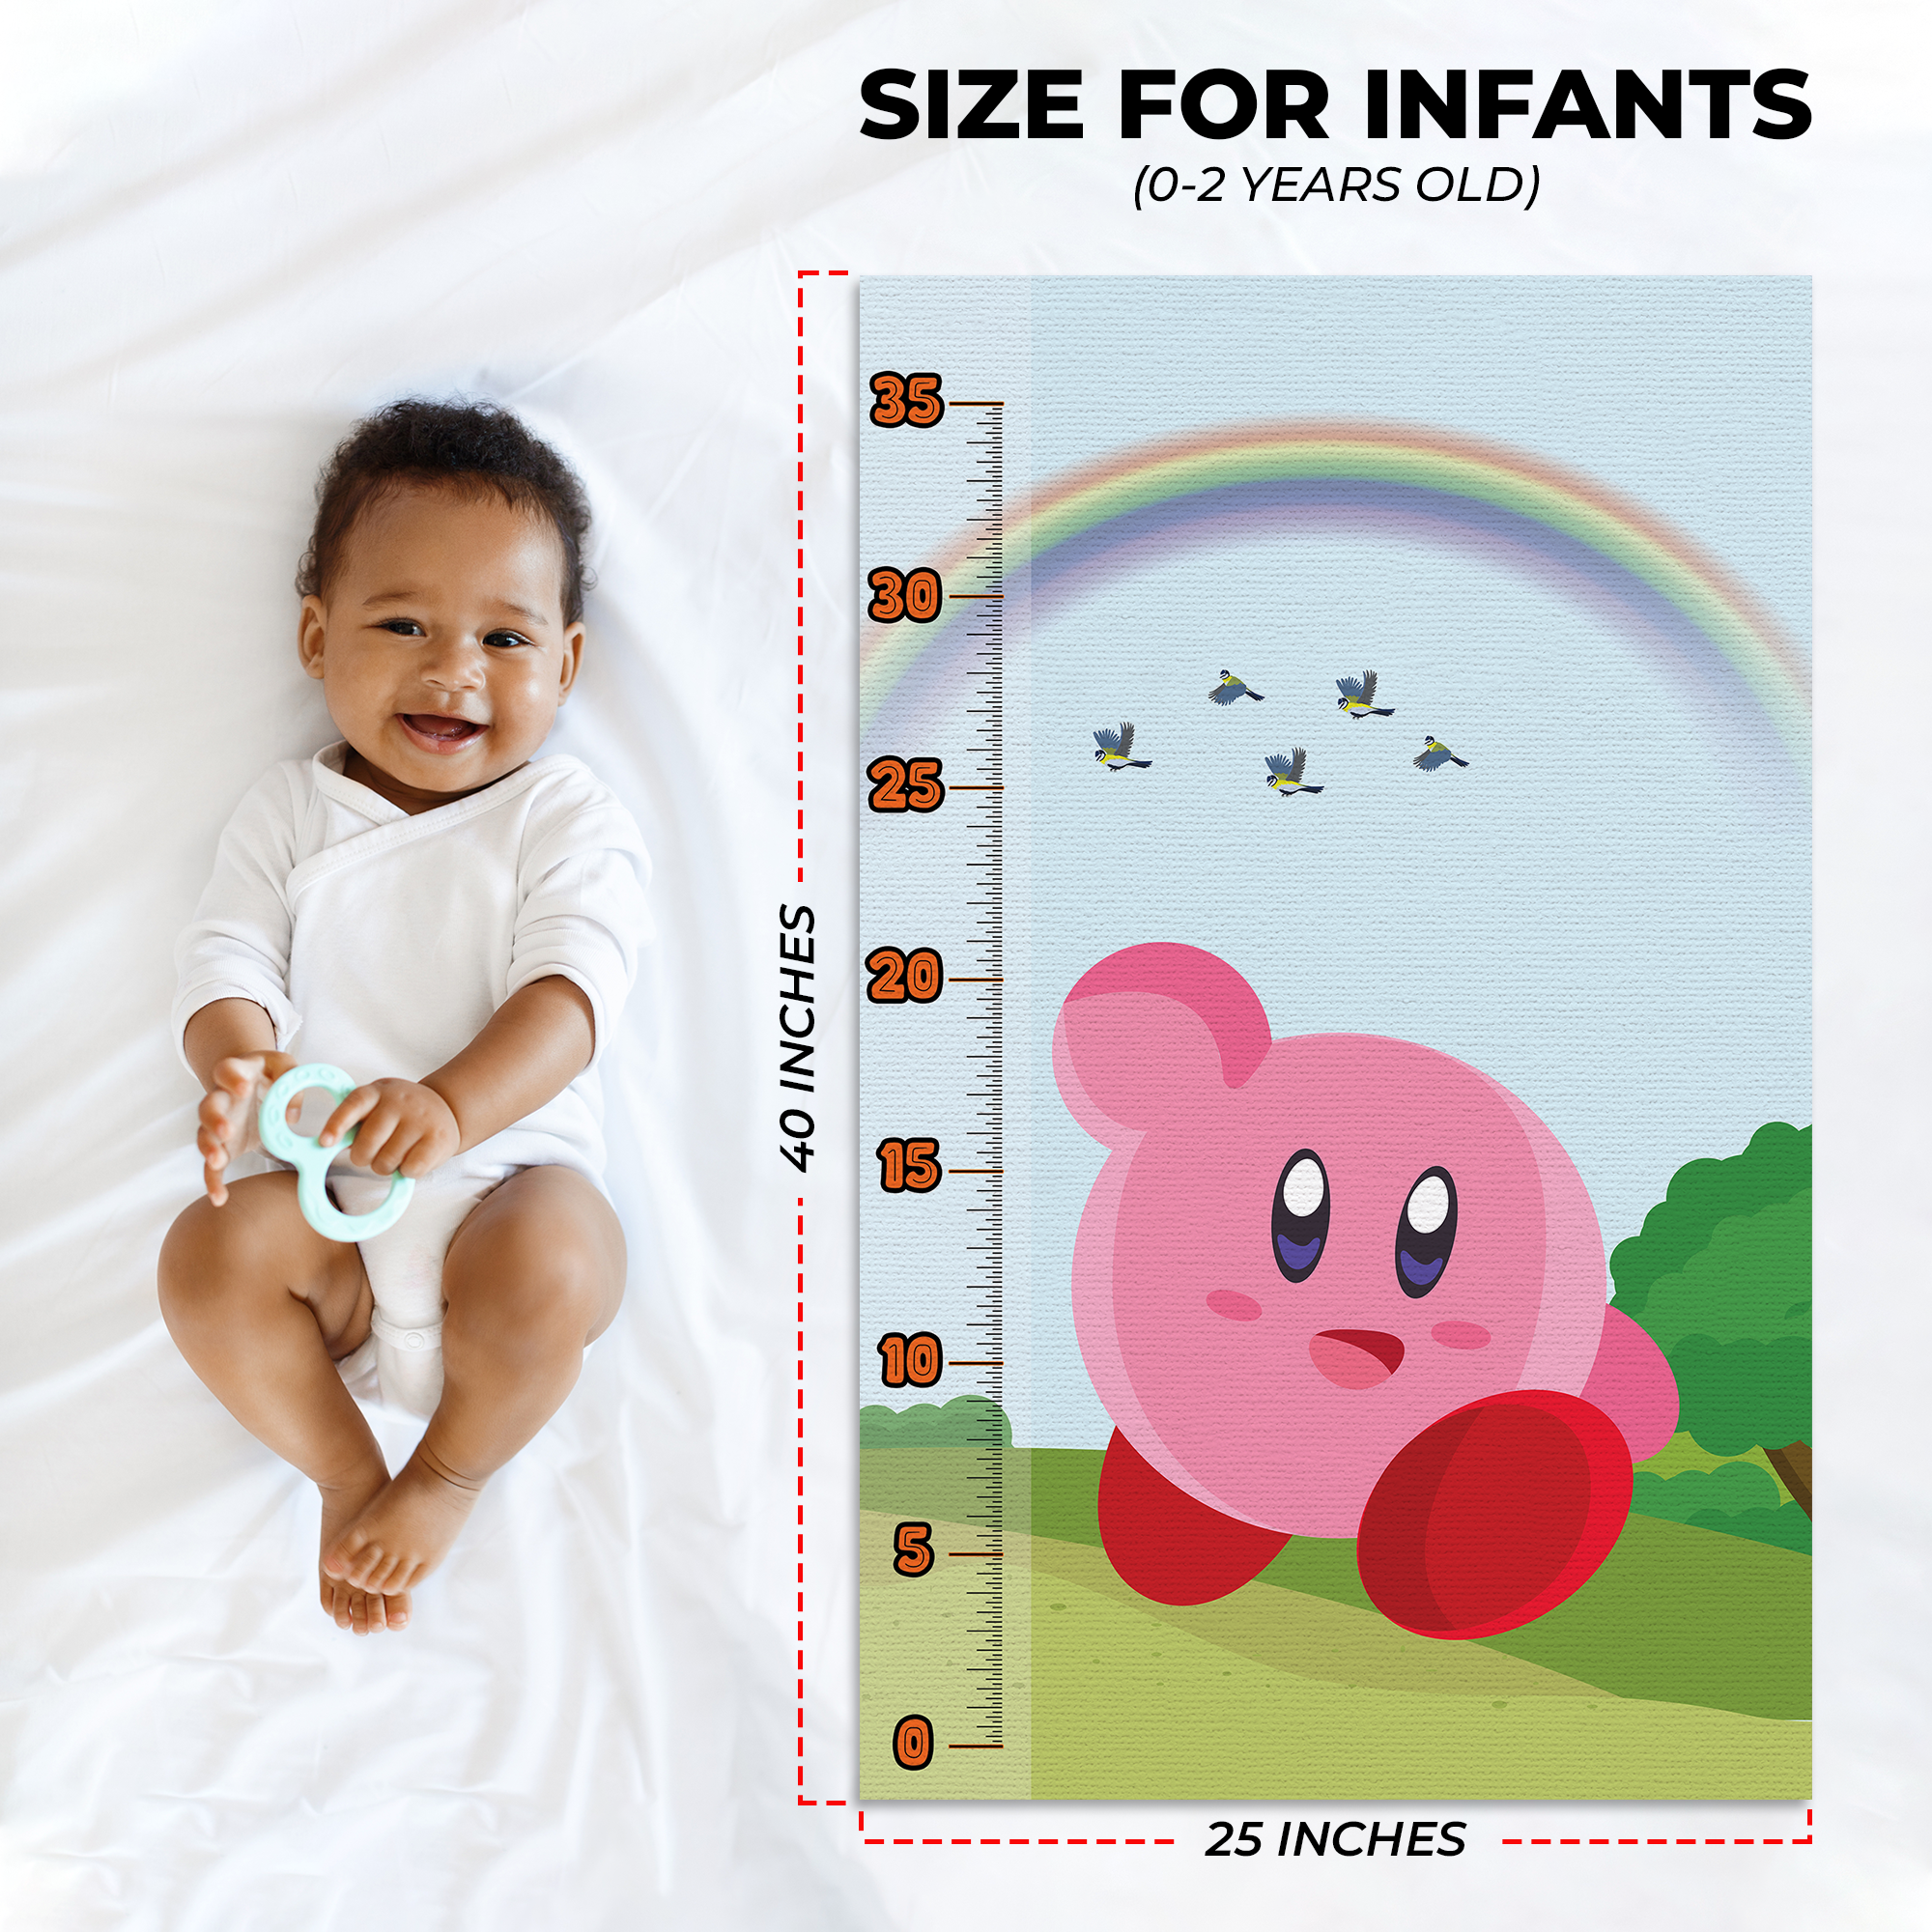 Kirby Infant Growth Chart